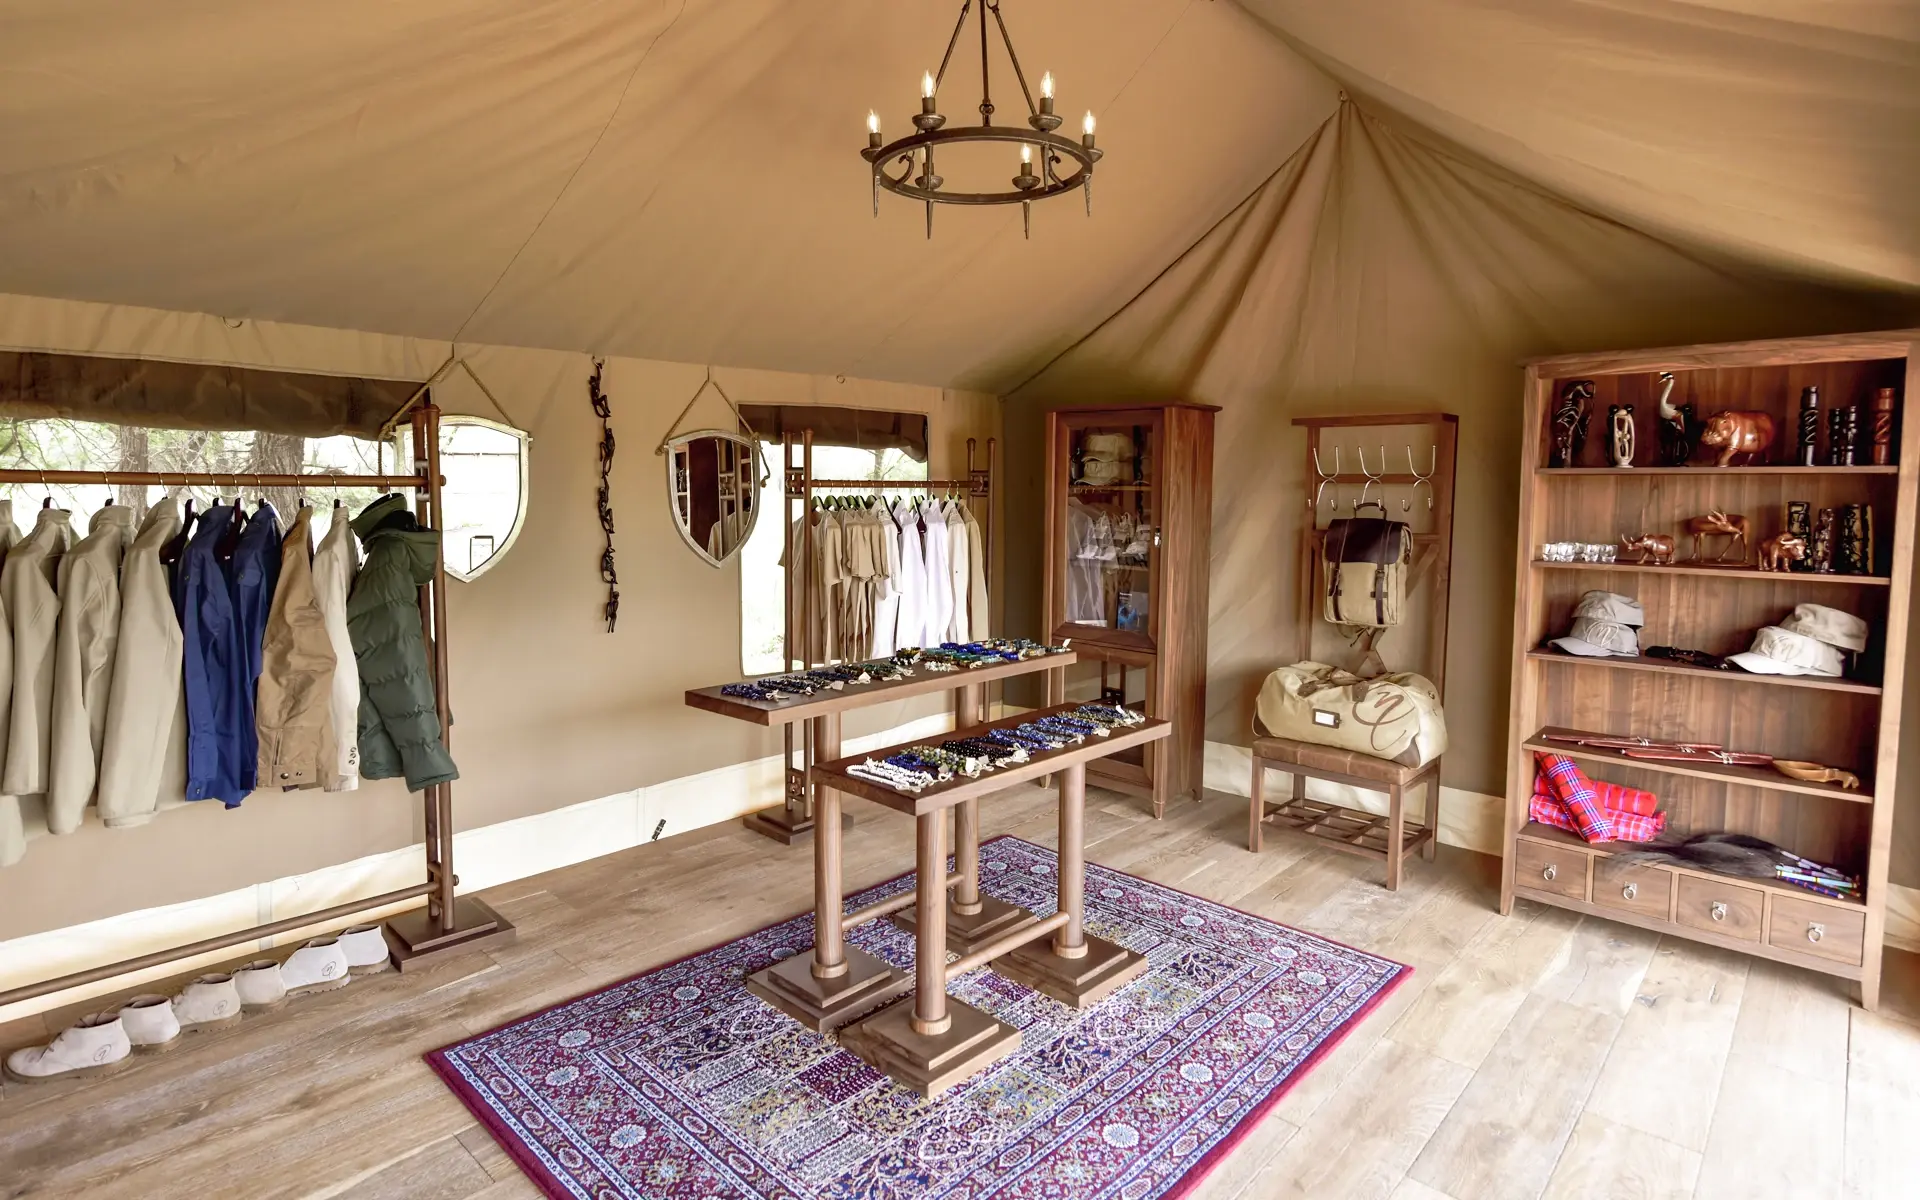 Trading Post with a selection of safari gear, gift items, and photography equipment on lease